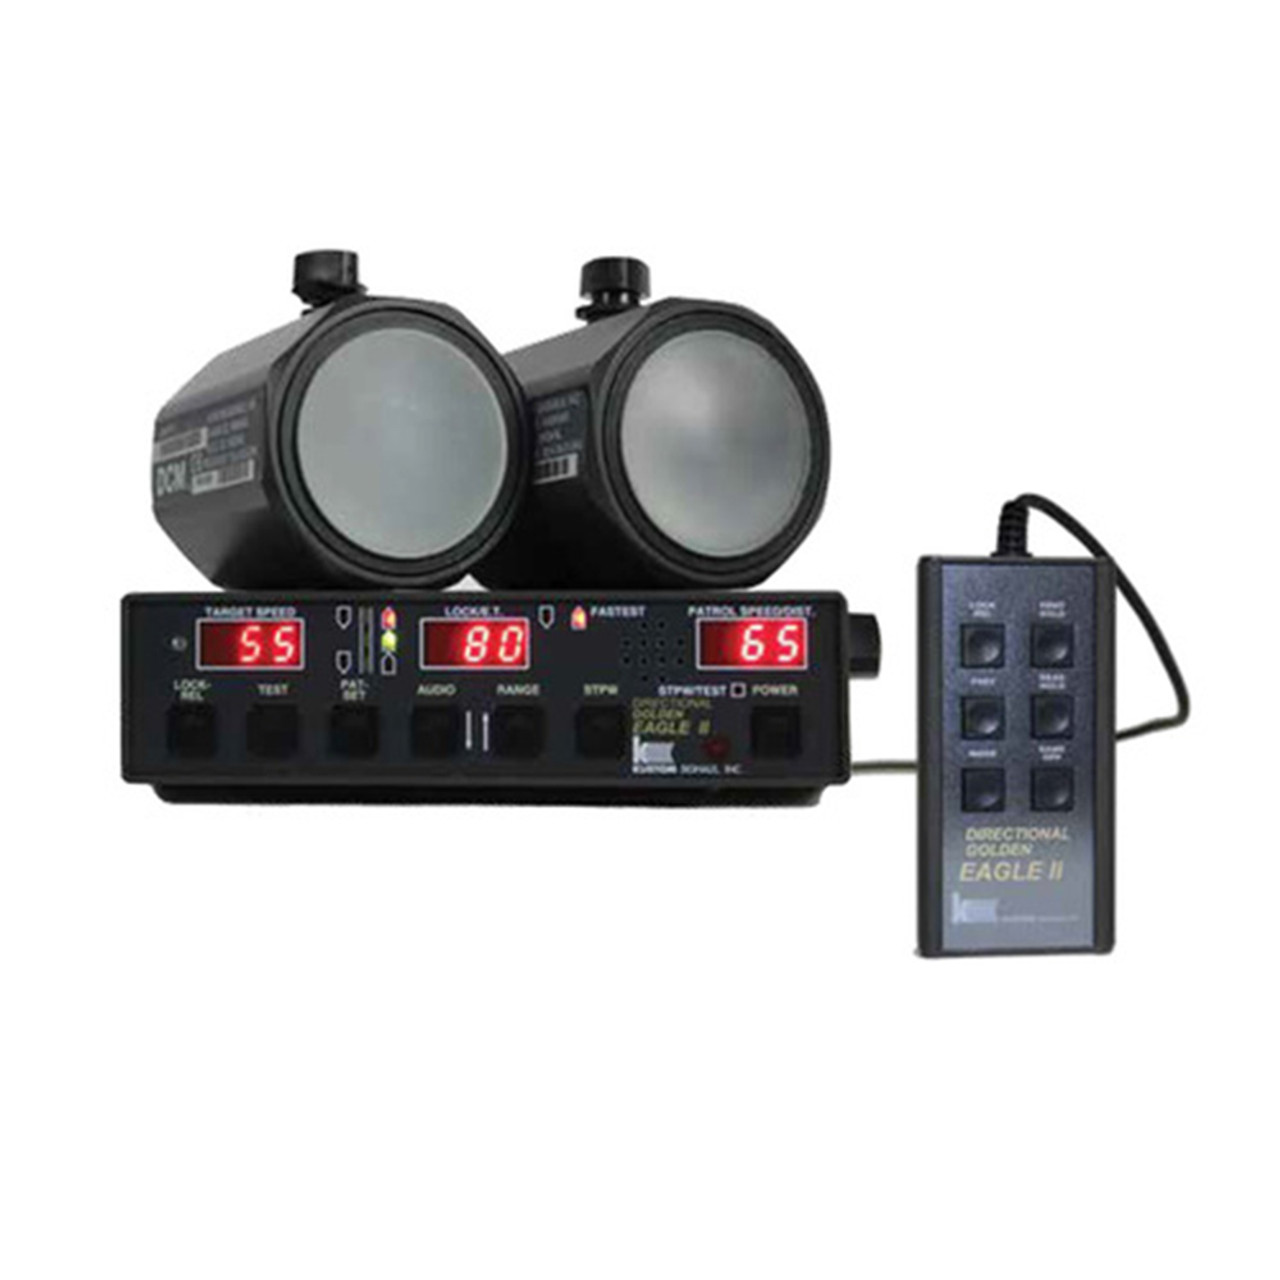 Kustom Signals Directional Golden Eagle II Accessory, Series Video Interface port and cable to connect w/ Kustom Video system